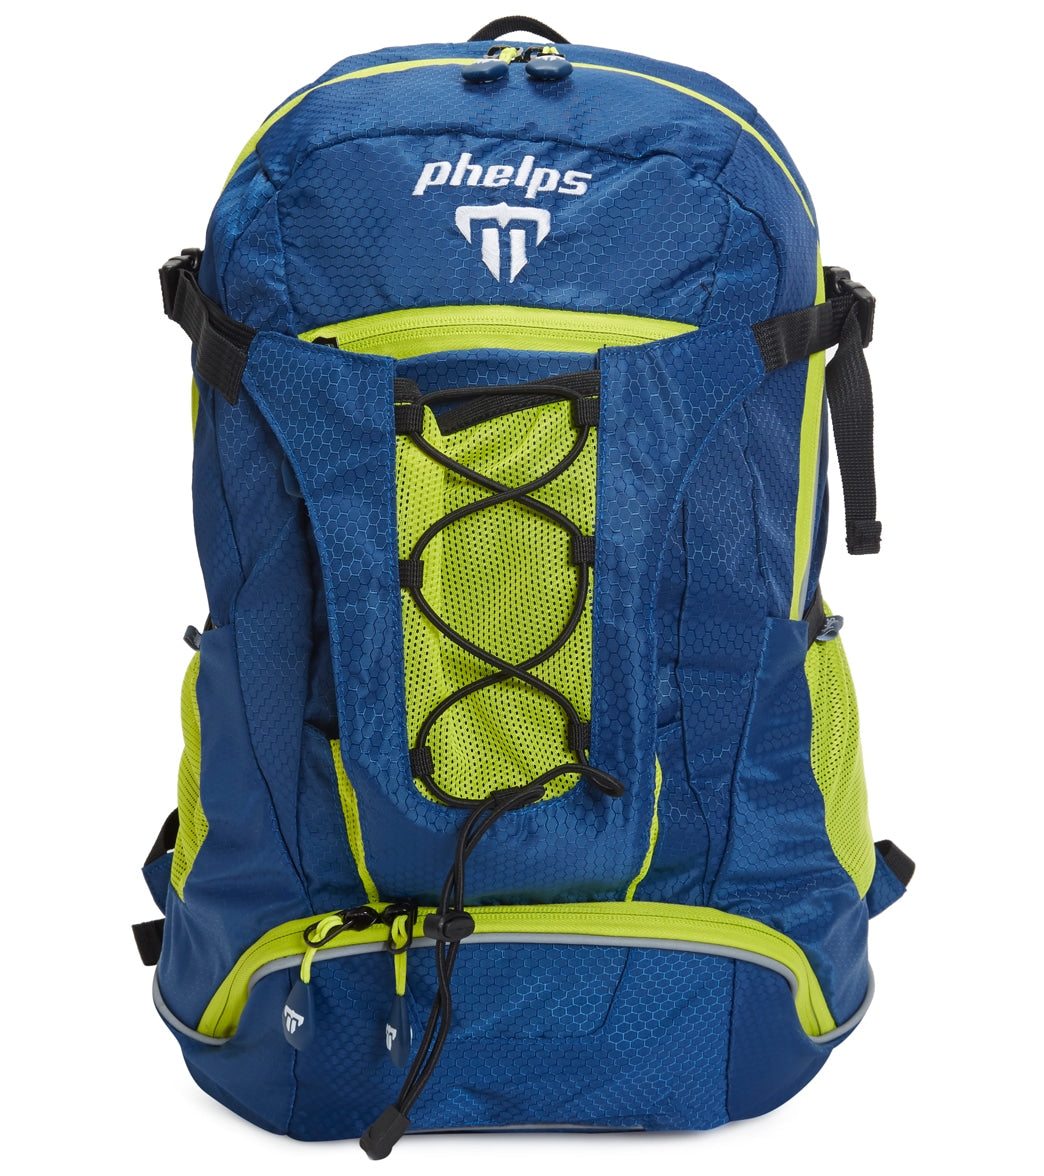 Phelps Team Backpack - Navy/Bright Green Os - Swimoutlet.com